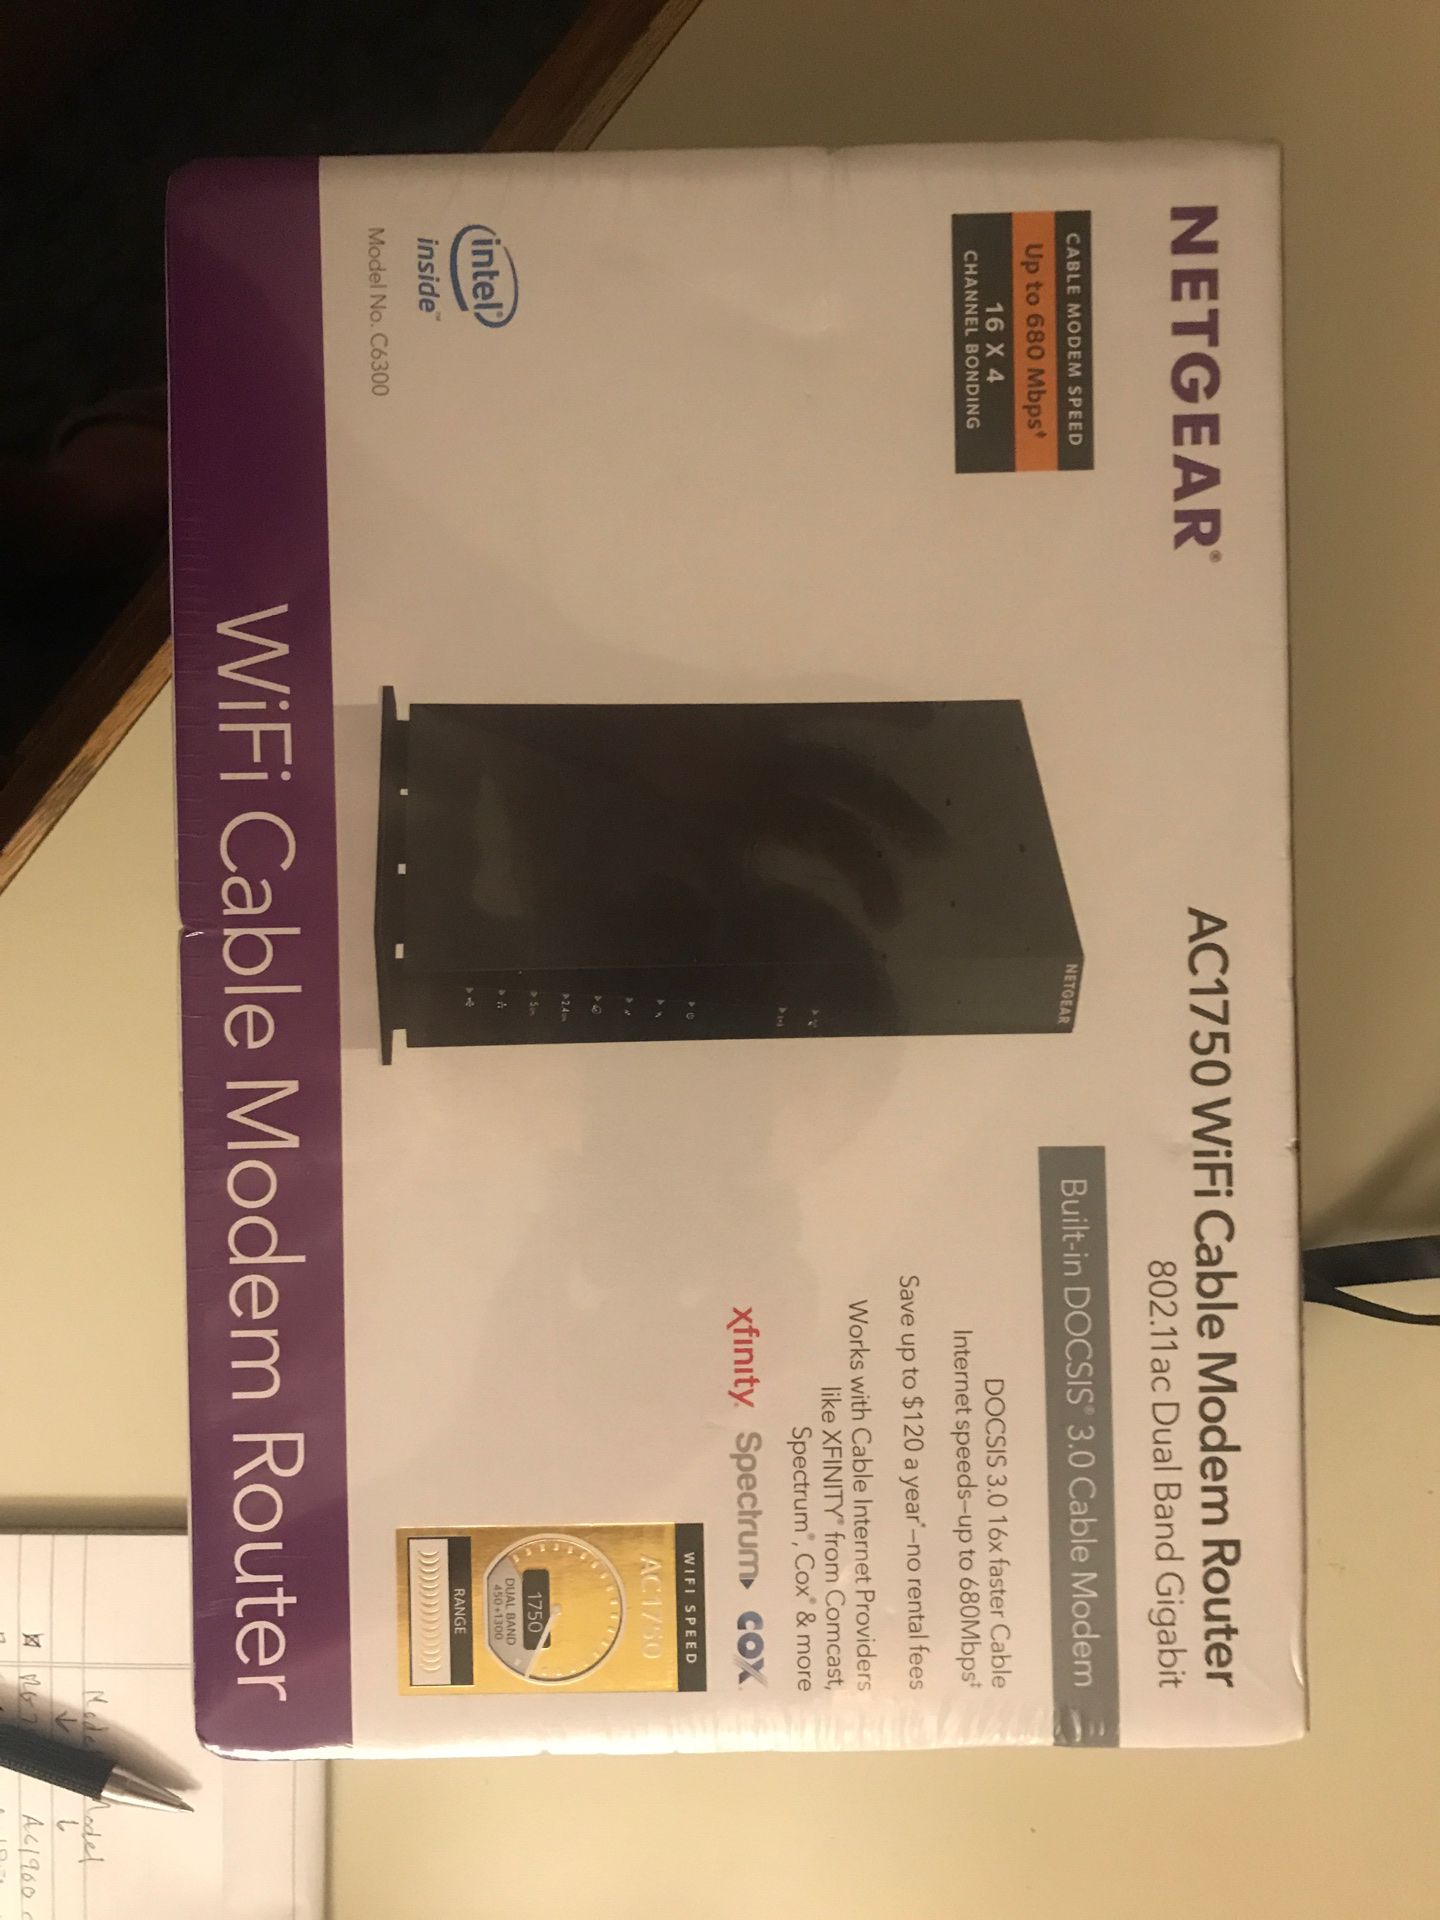 NETGEAR - Dual-Band AC1750 Router with 16 x 4 DOCSIS 3.0 Cable Modem - Black